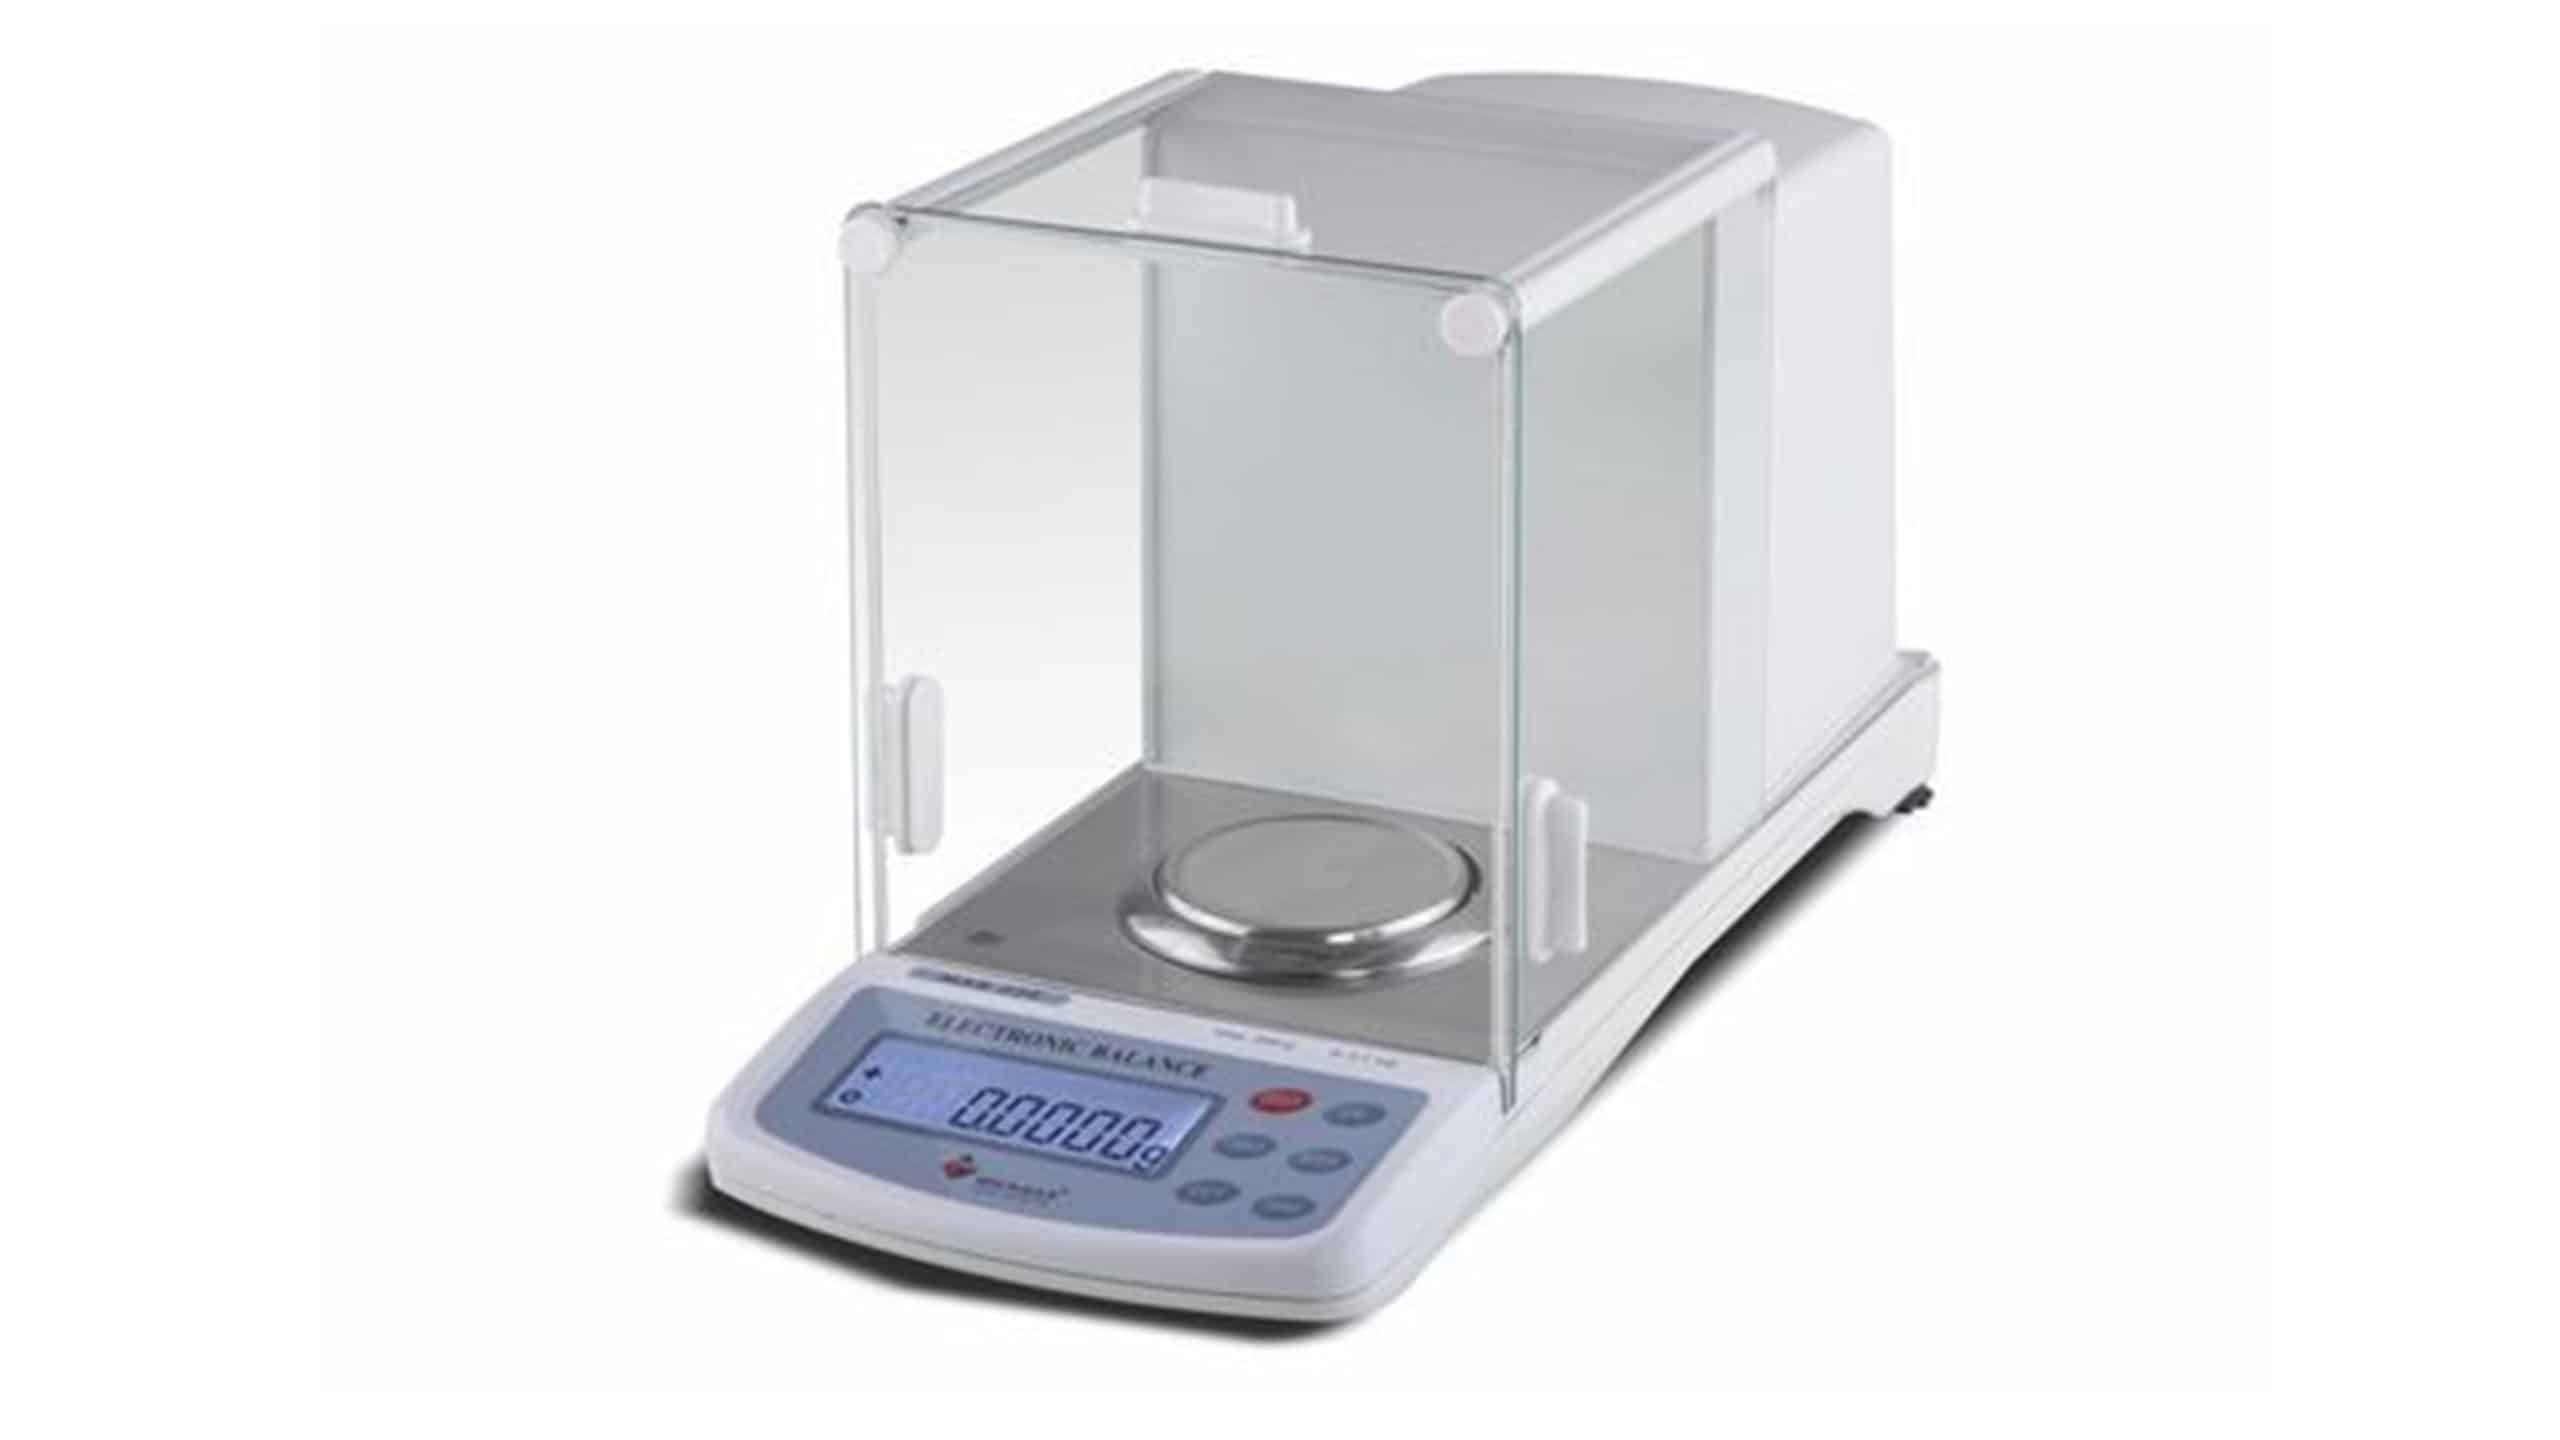 Diamond Weighing Scales